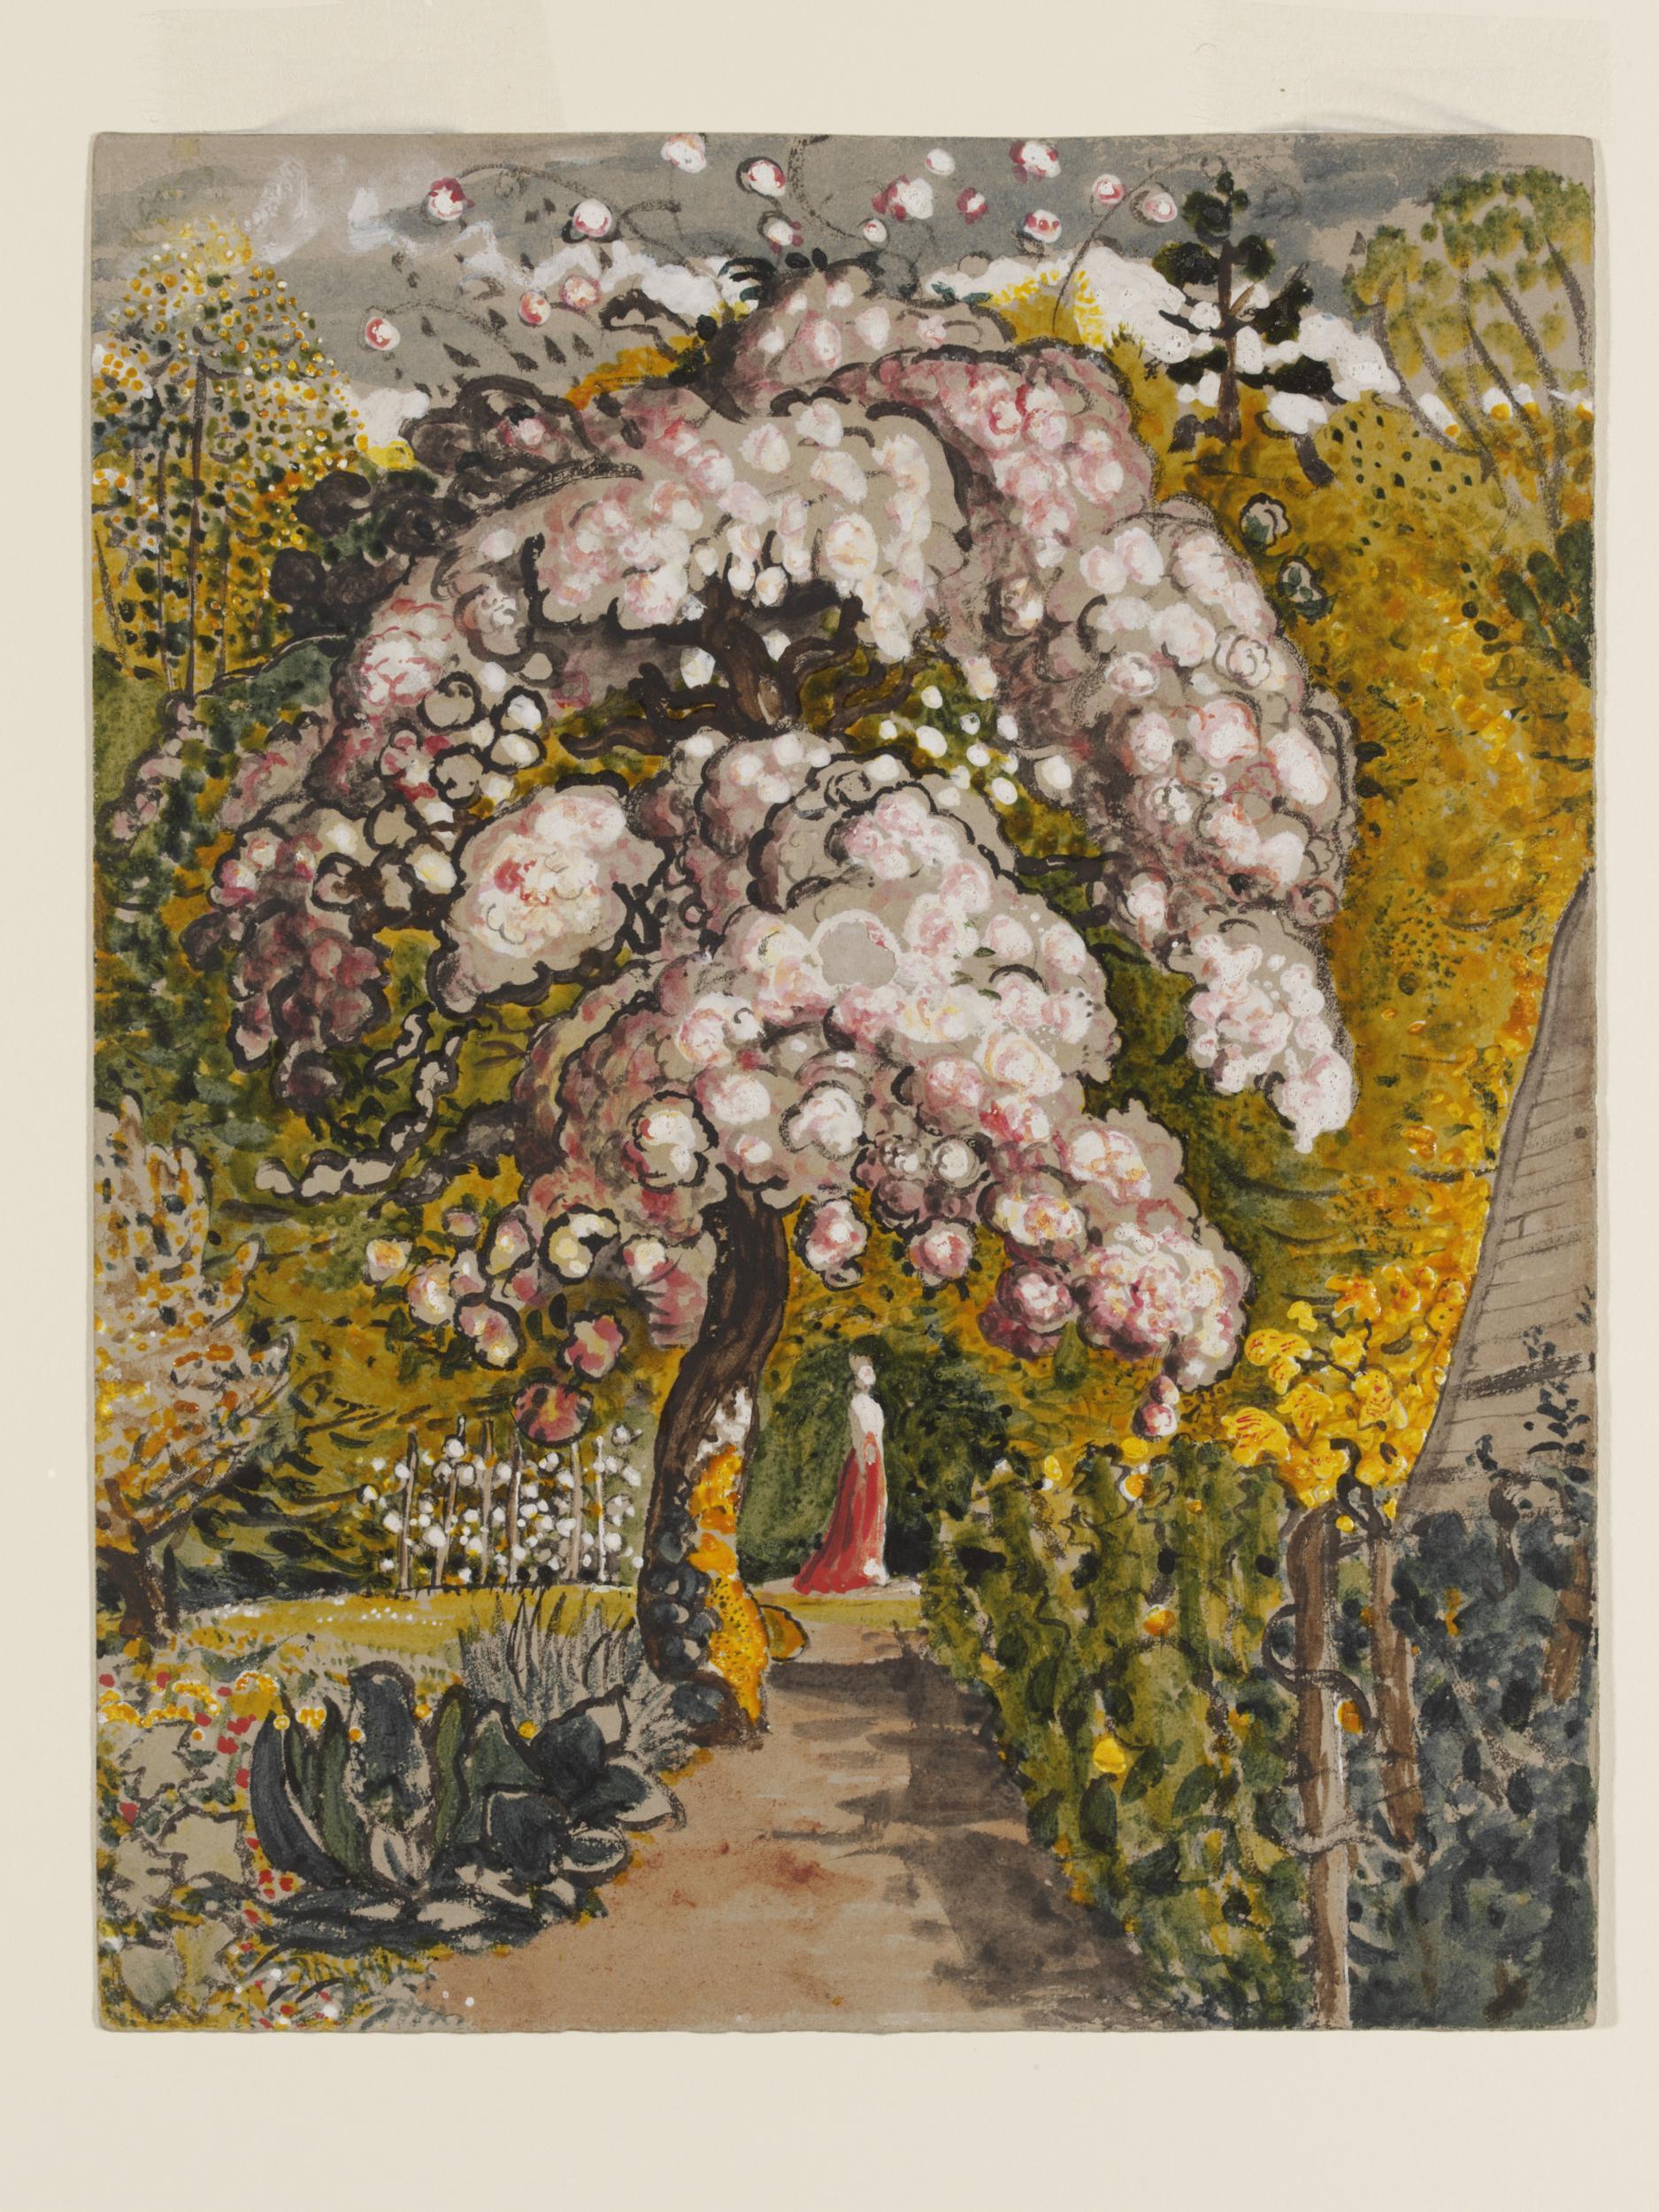 Painting of blossom on tree in garden with lady underneath